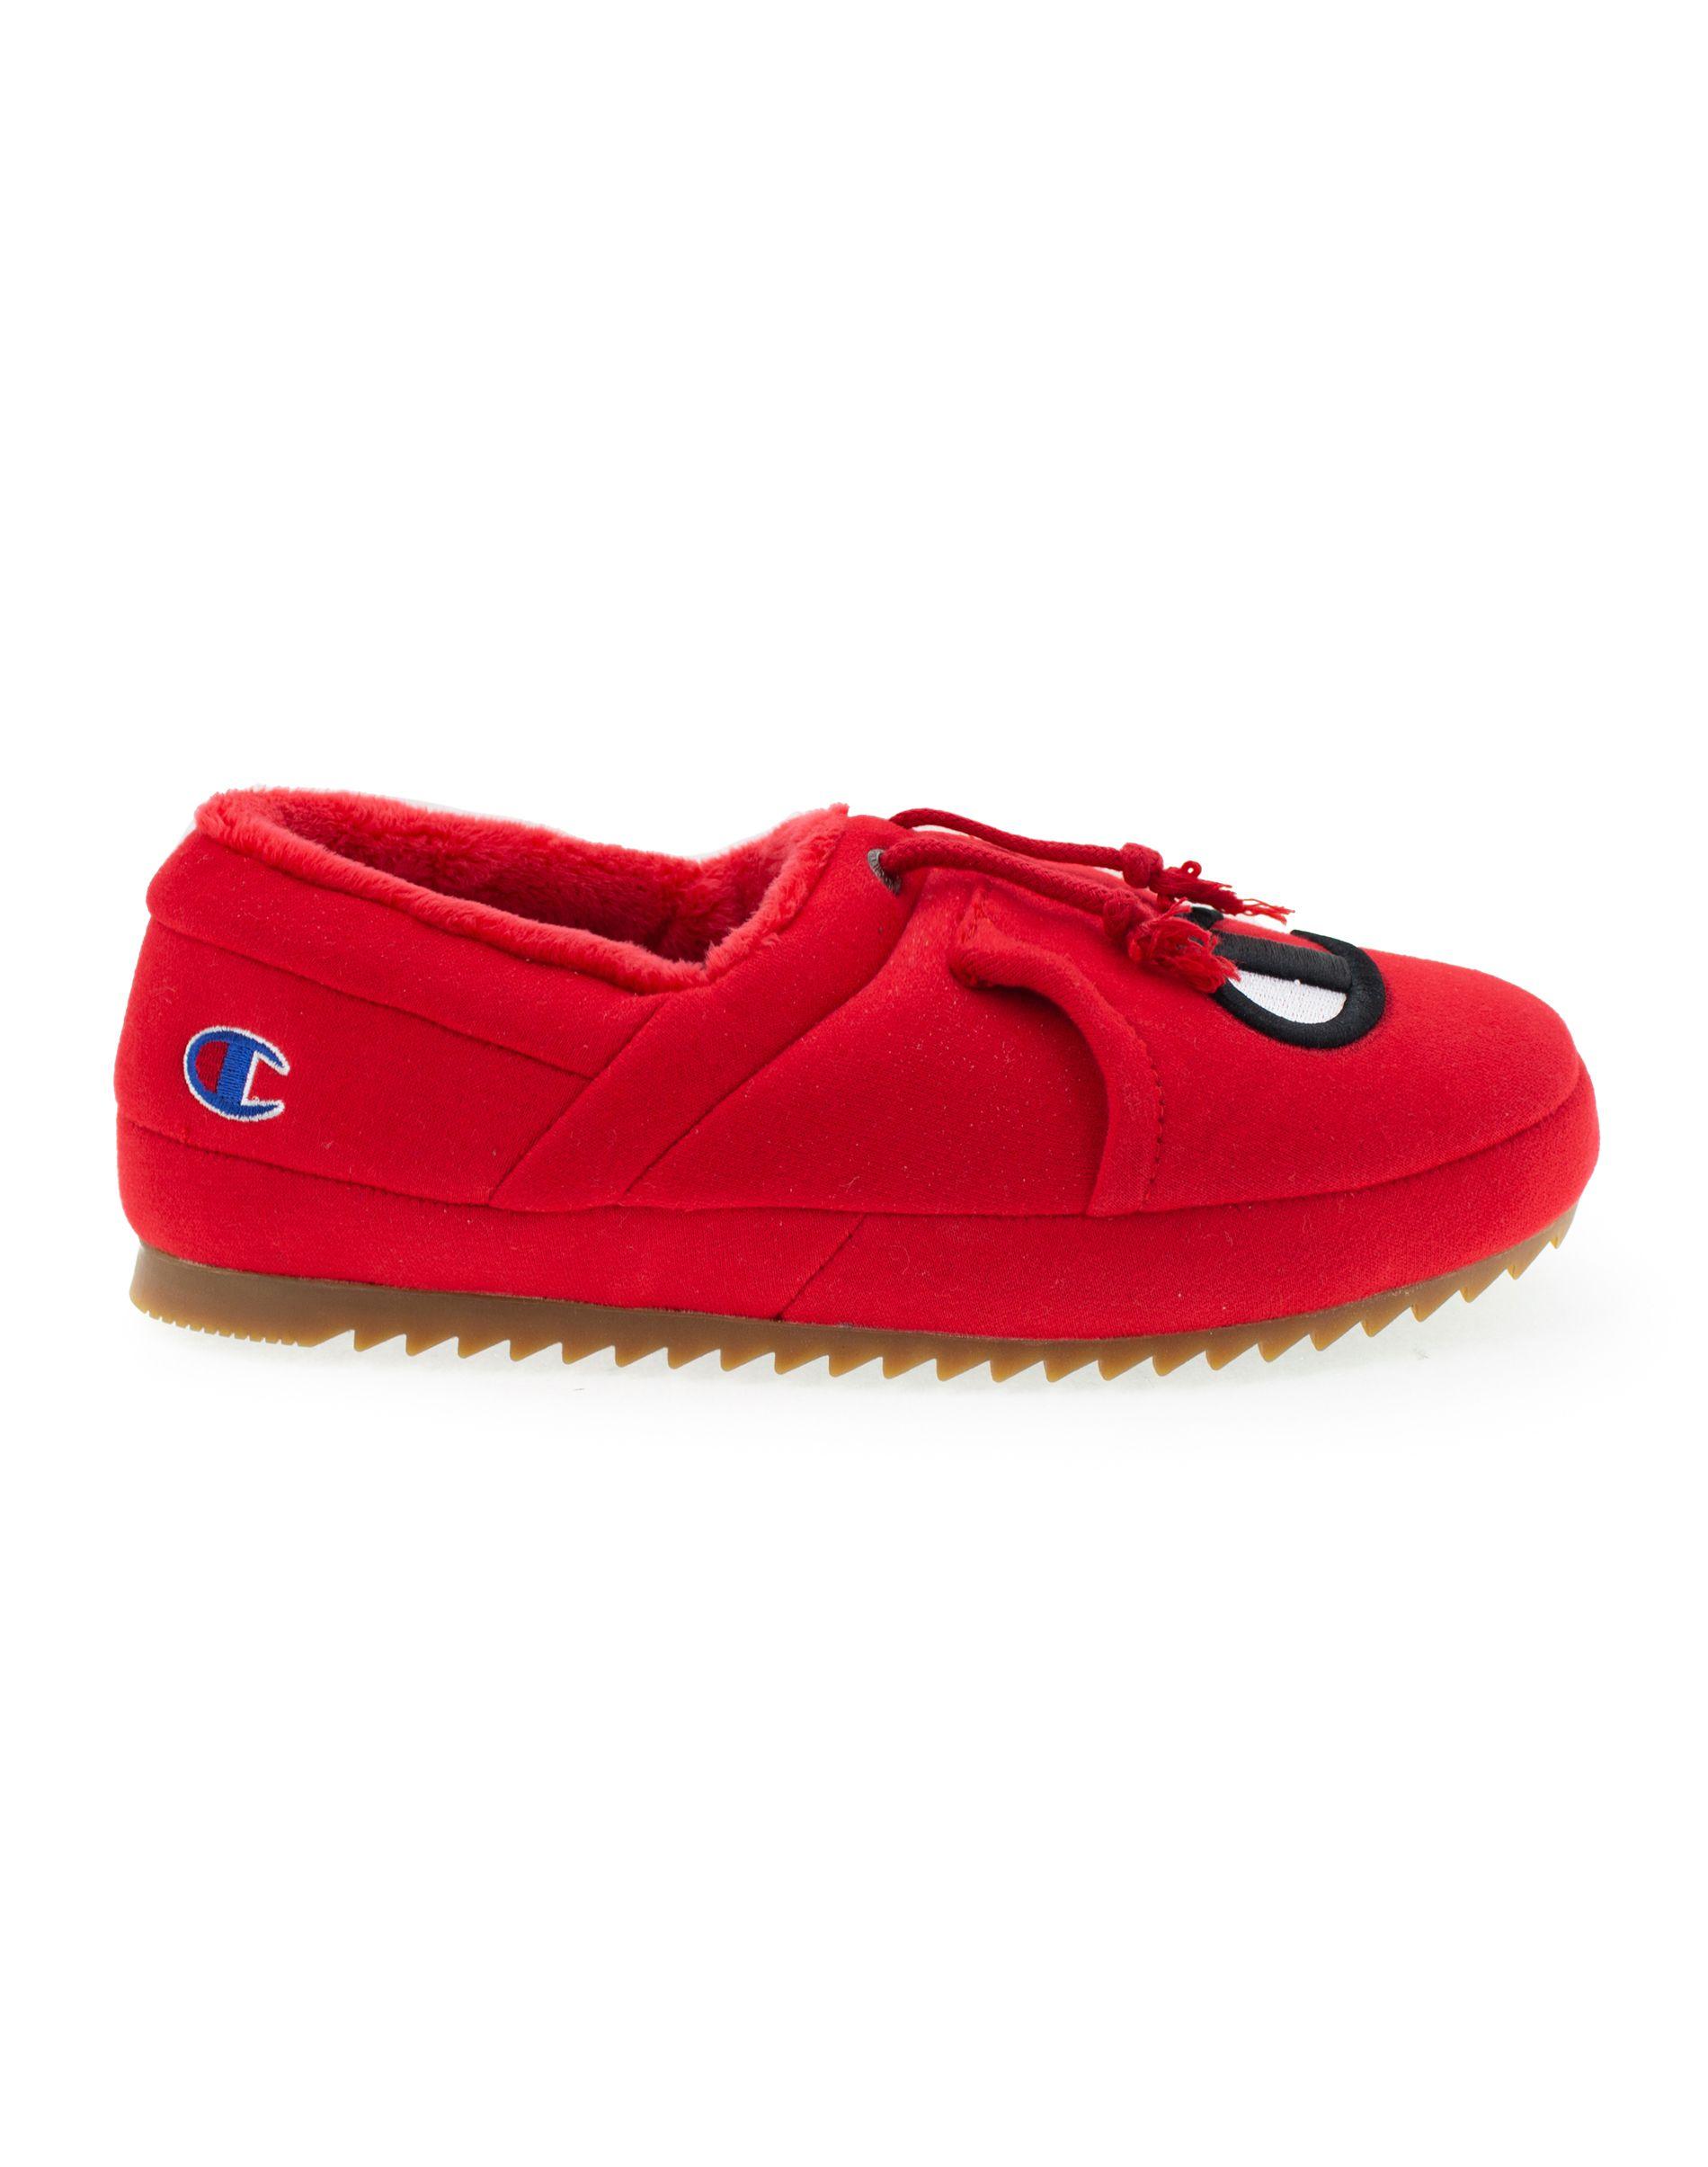 Champion Slippers Canada Shop, SAVE 40% icarus.photos